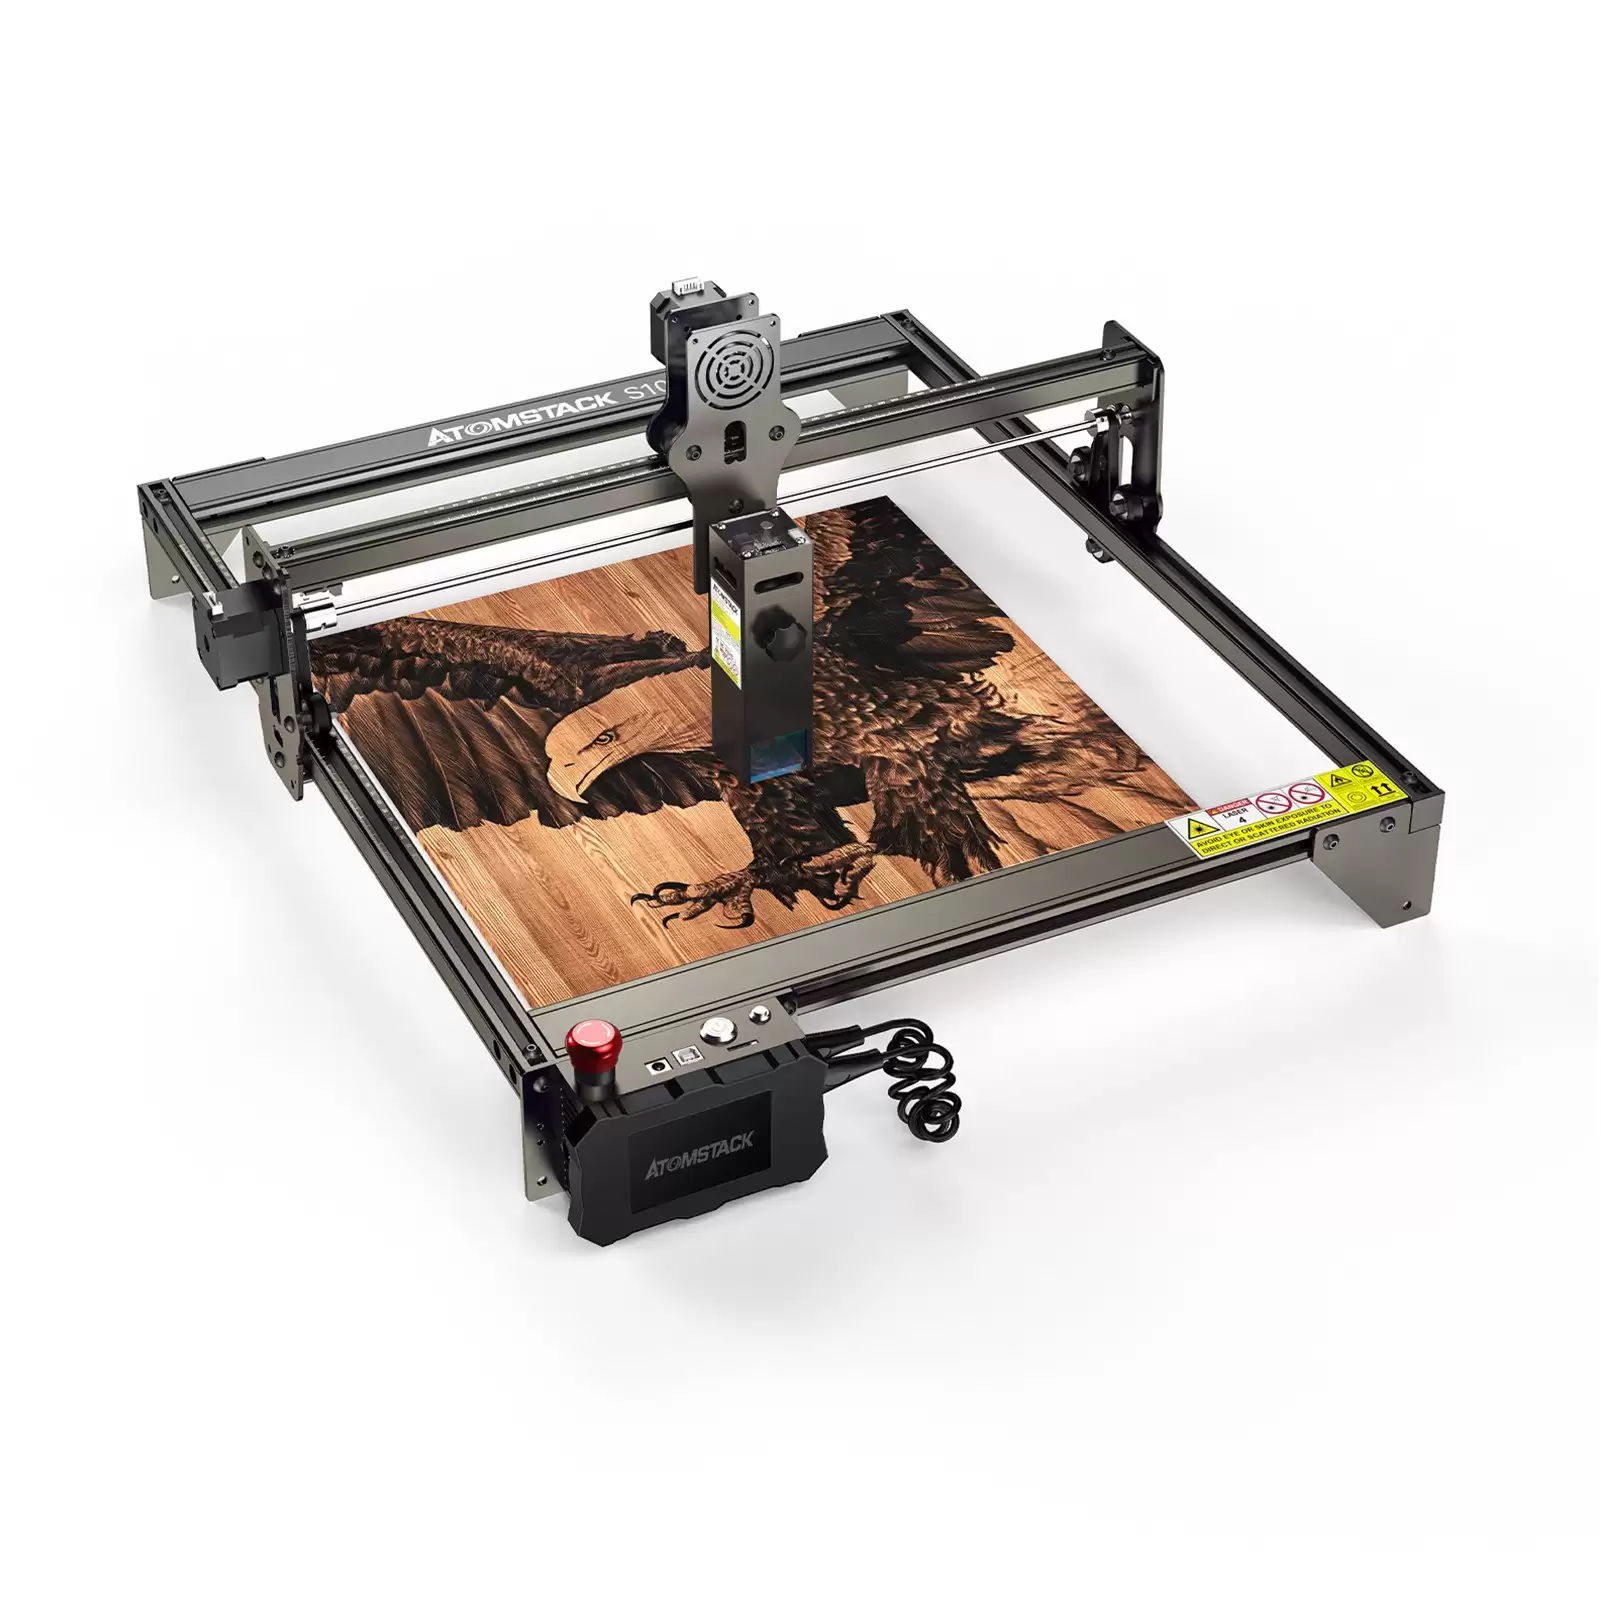 Order In Just $359.99 Atomstack S10 Pro Cnc Desktop Diy Laser Engraving Cutting Machine Using This Tomtop Discount Code